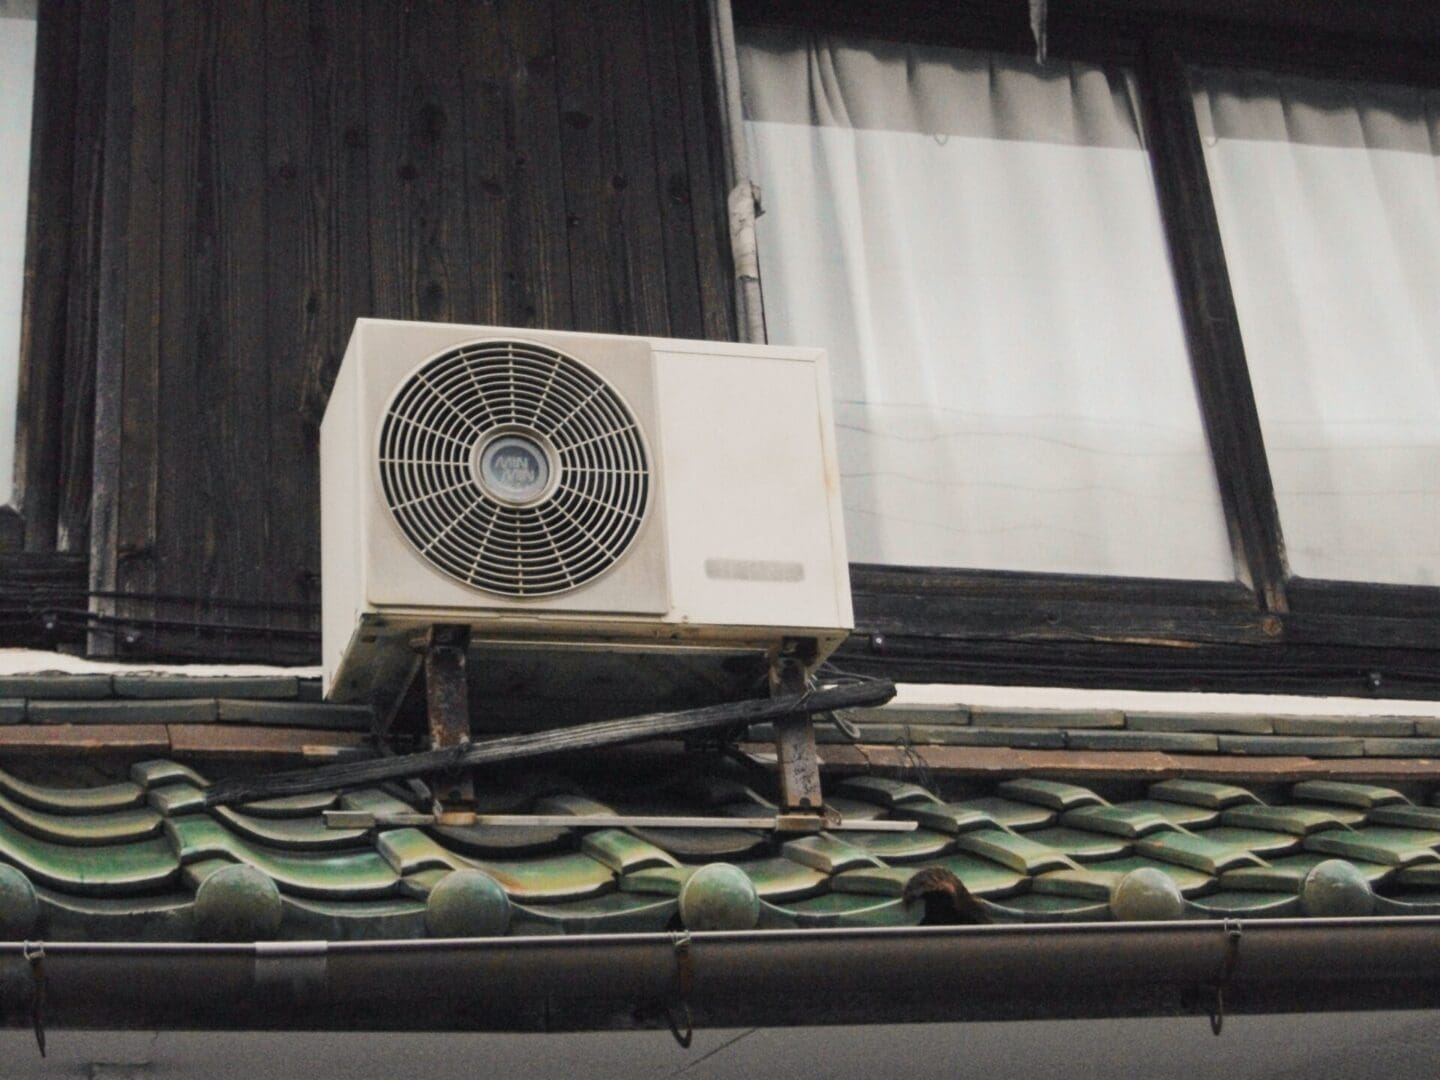 Air conditioning unit mounted on a tiled roof near a wooden window frame.